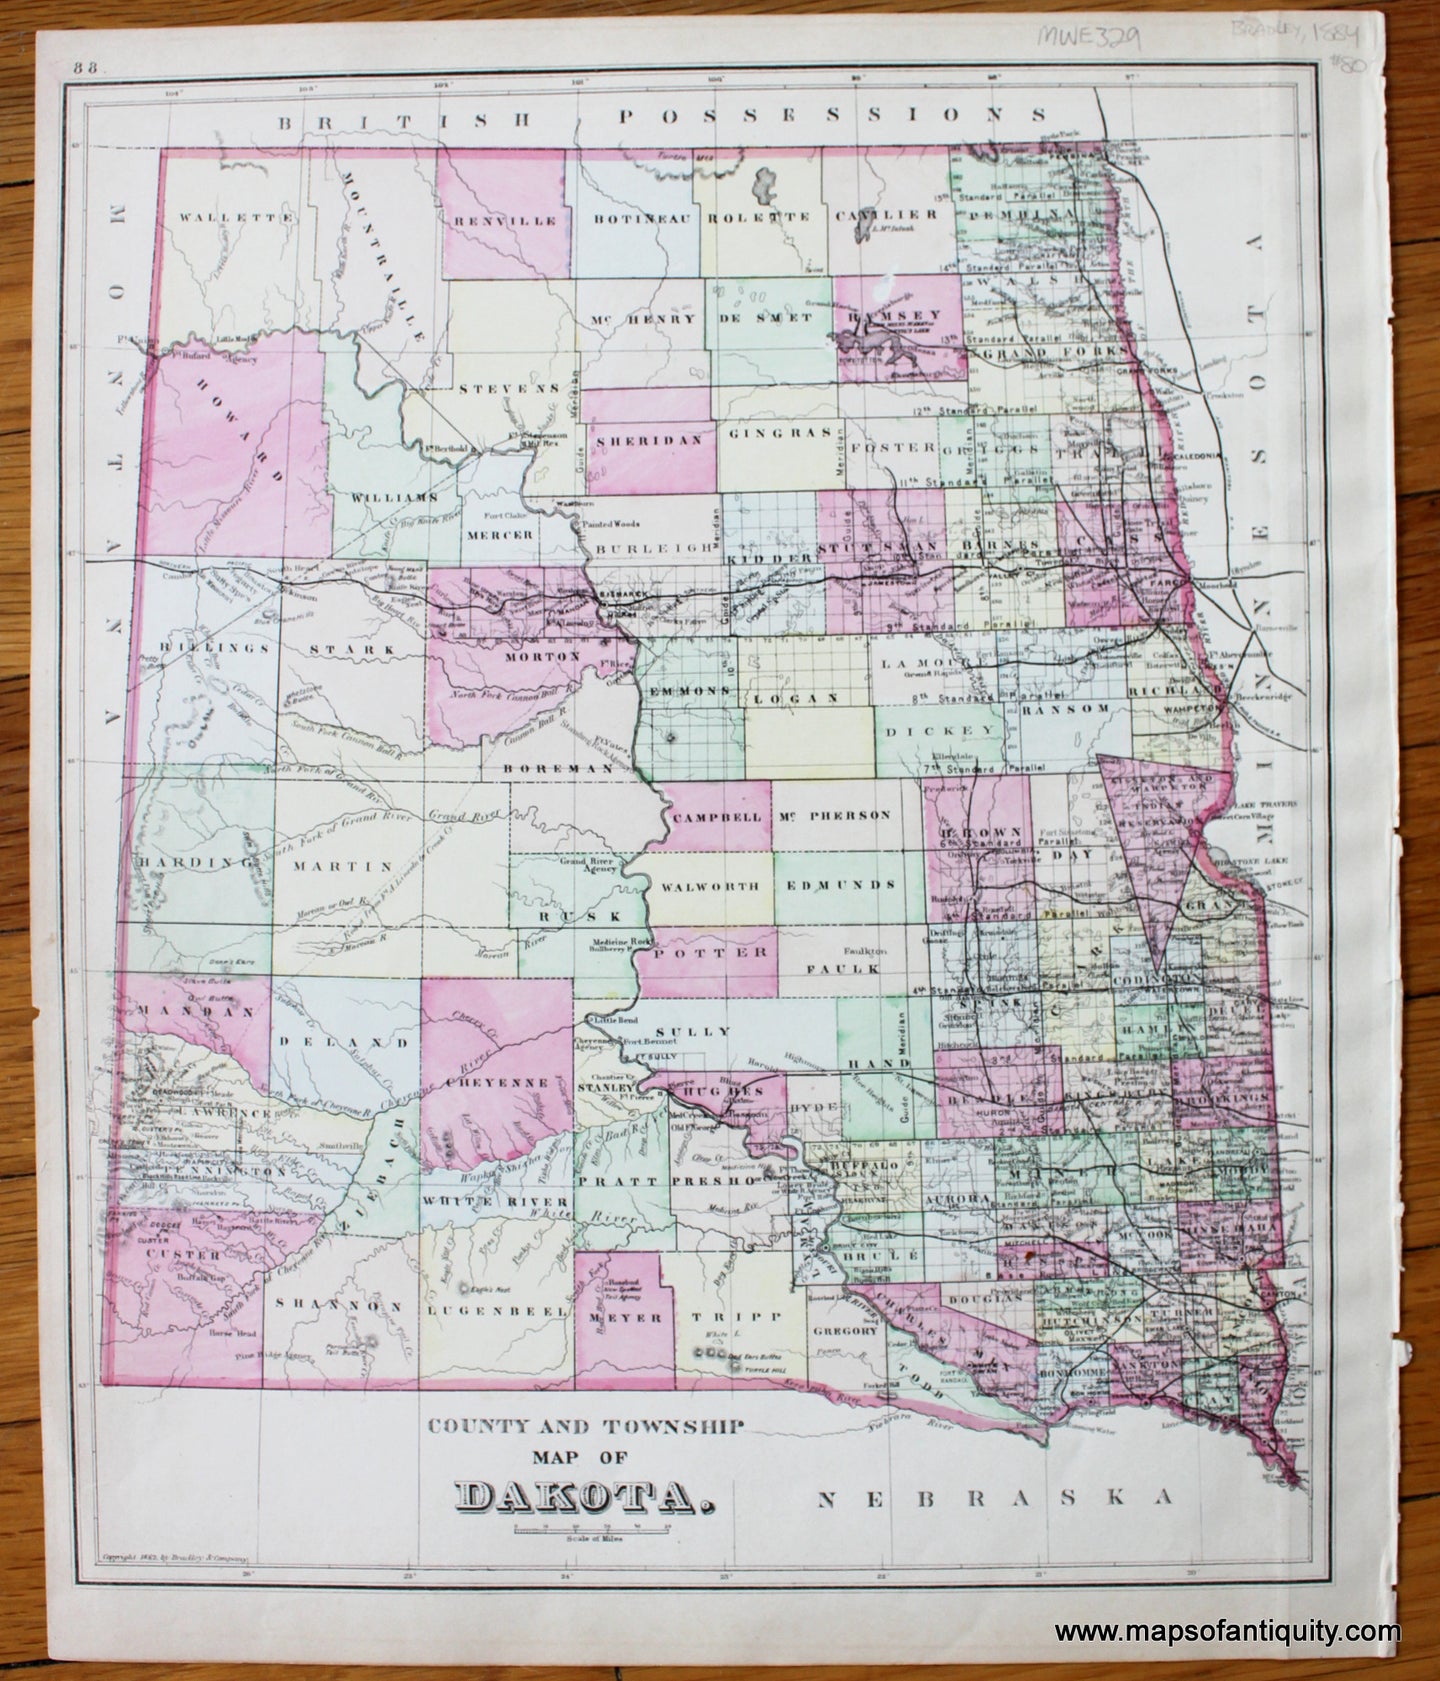 Antique-Hand-Colored-Map-County-and-Township-Map-of-Dakota.-United-States-Midwest-1884-Bradley-Maps-Of-Antiquity